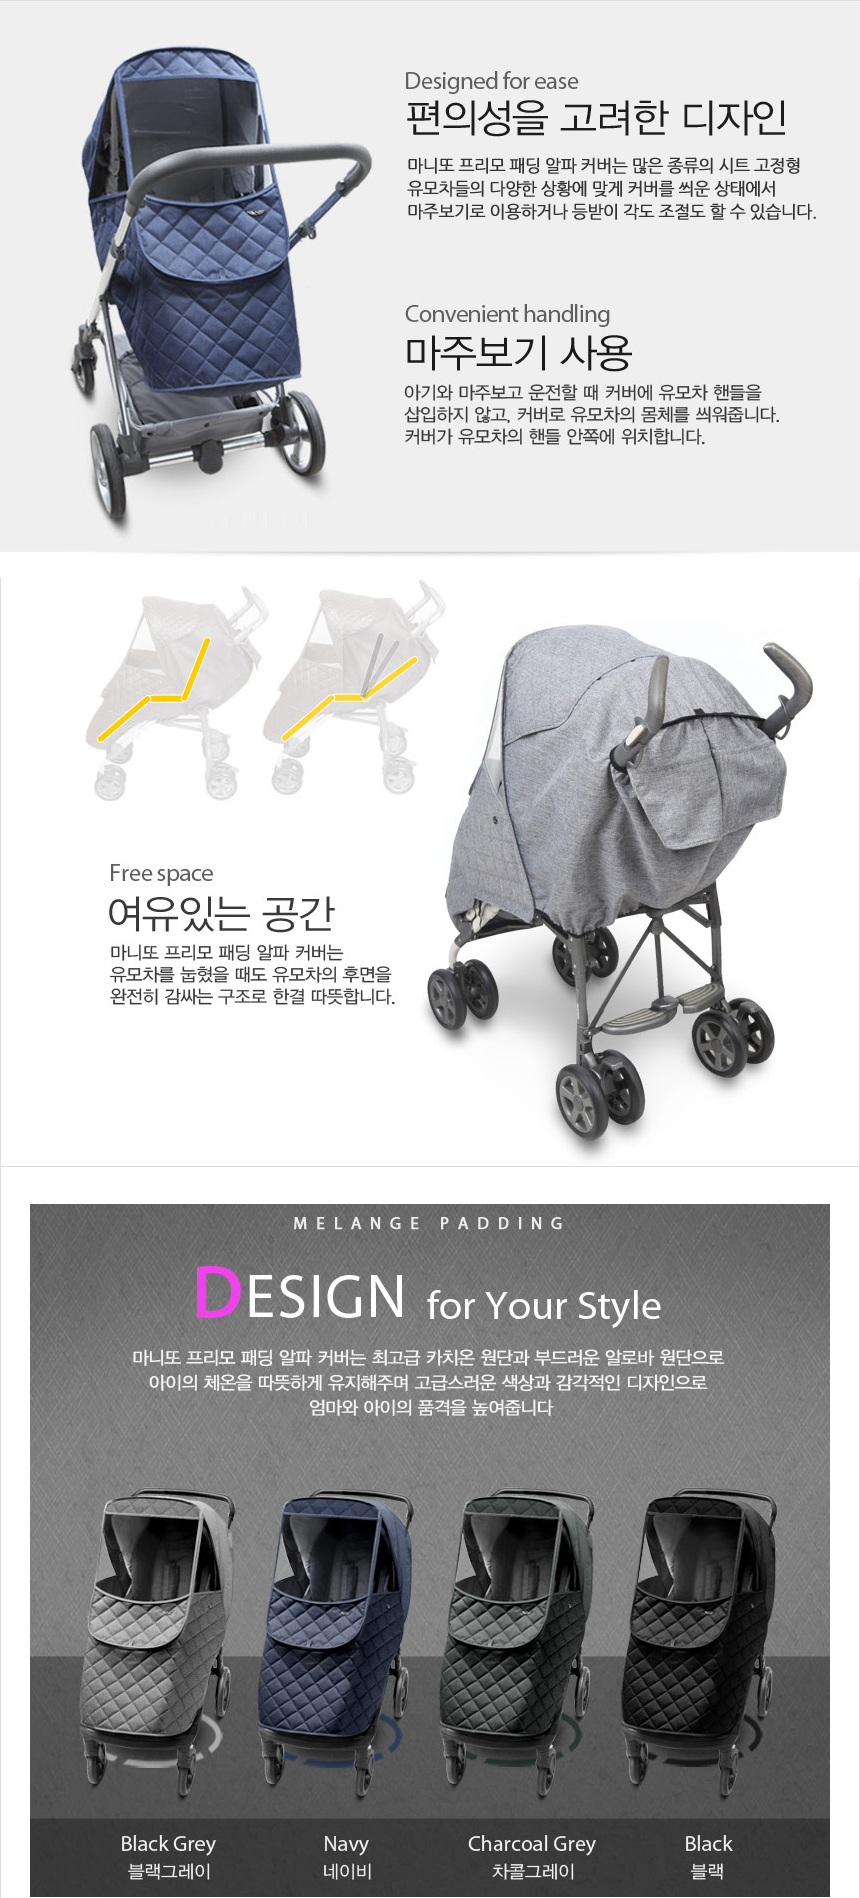 Manito black grey Wind Weather Shield for outdoor strolling Primo Melange Beta Cover/Cover for Baby Stroller and Pushchair Rain Cover Eye Protective Wide Windows 